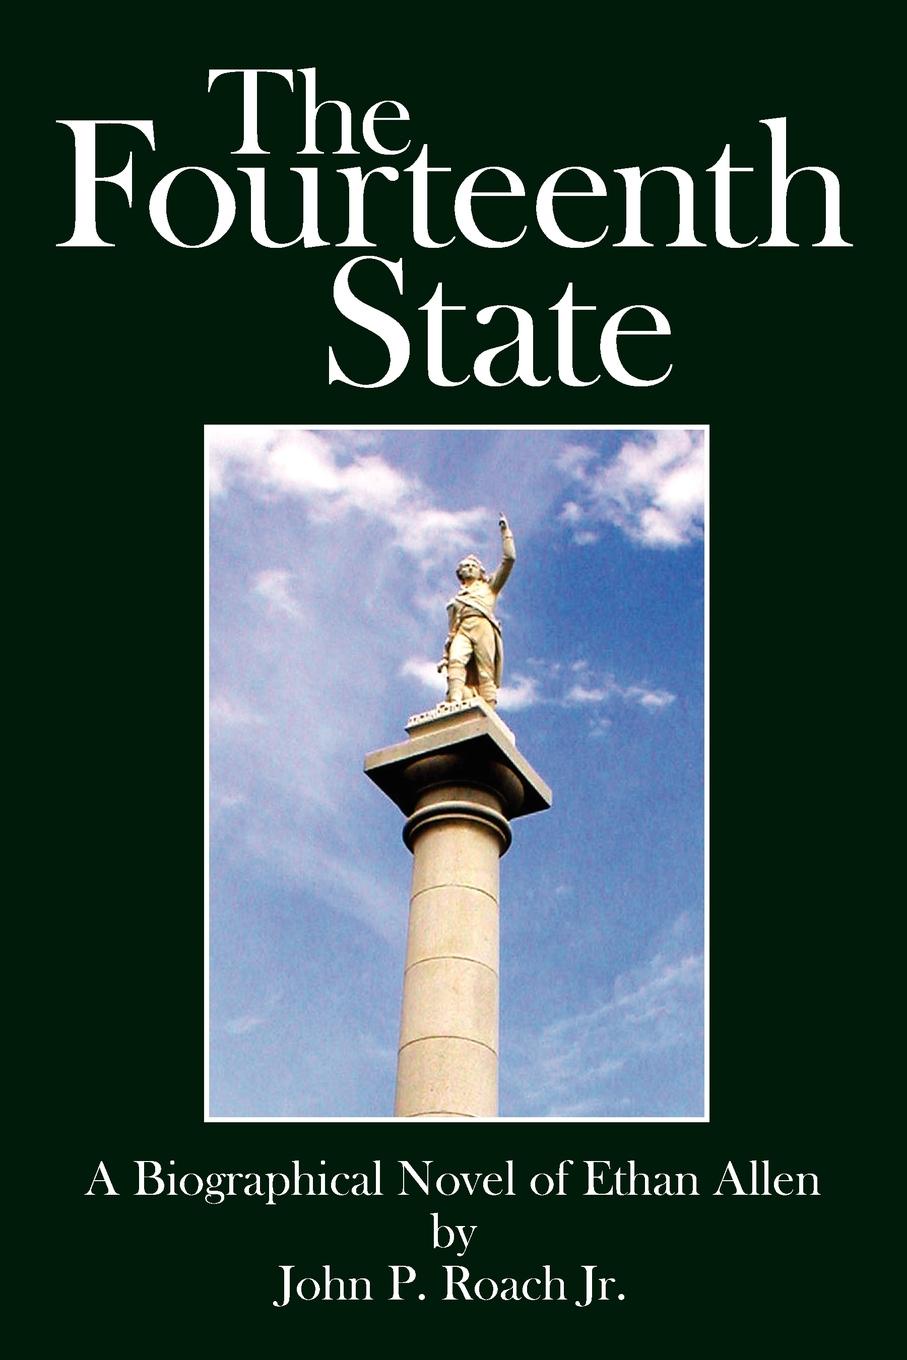 The Fourteenth State. A Biographical Novel of Ethan Allen